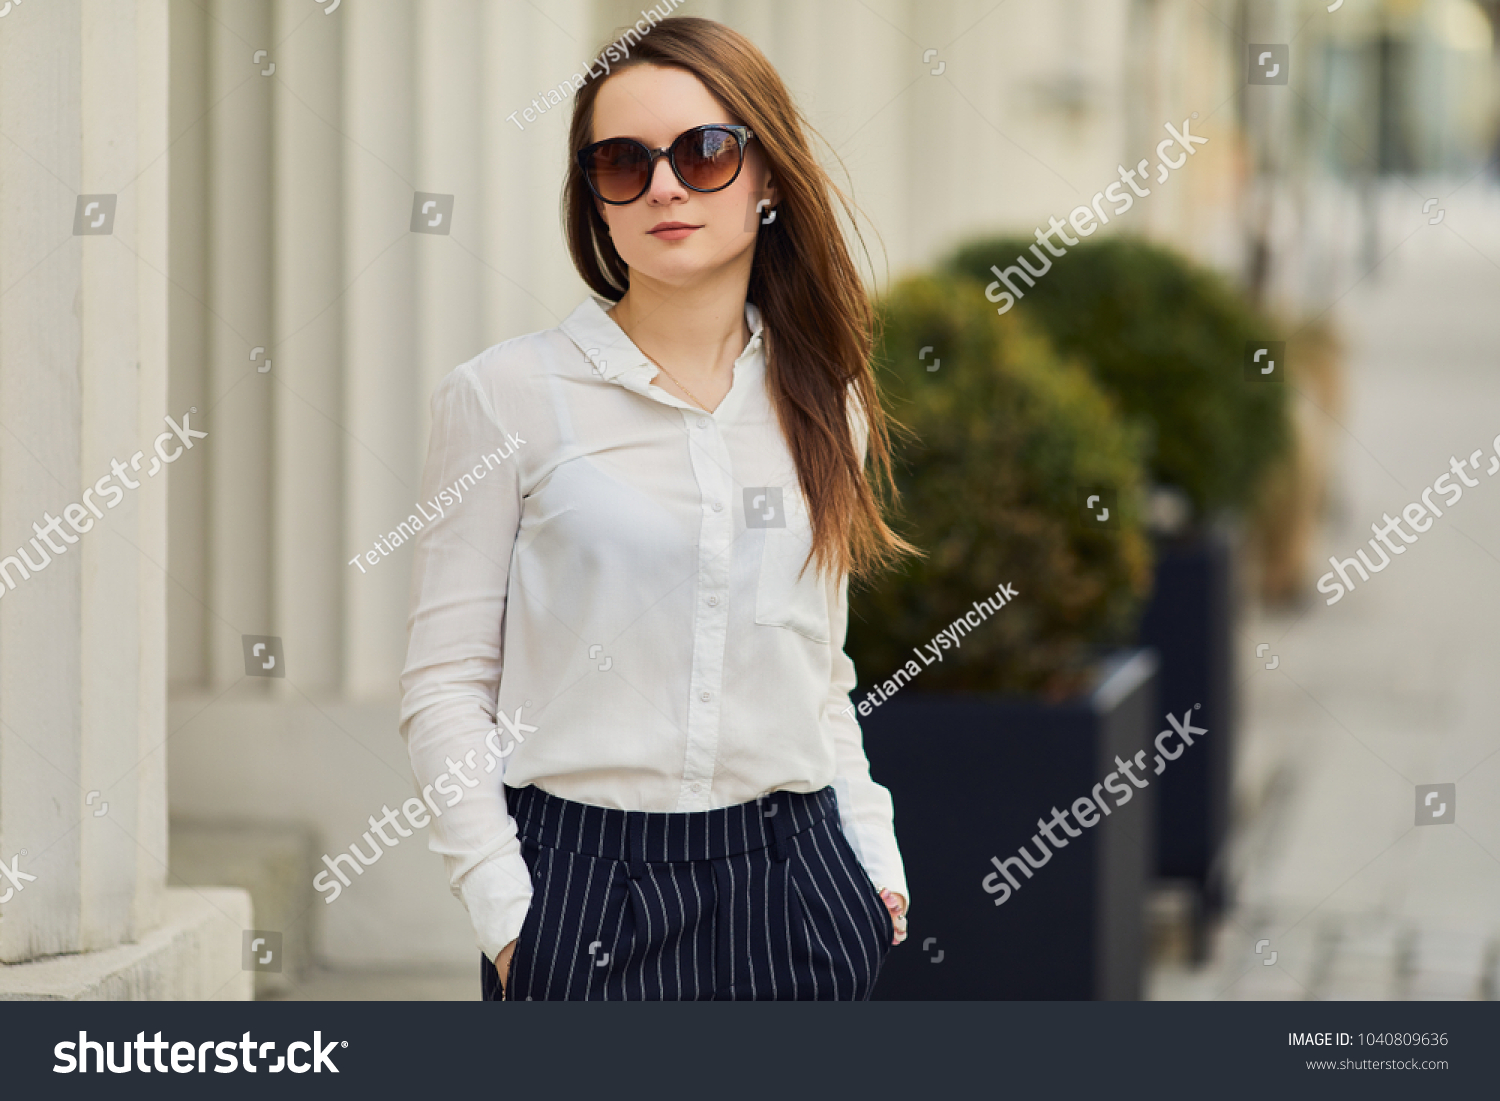 Young pretty woman walk on the street wear glasses and office clothing, spring time #1040809636